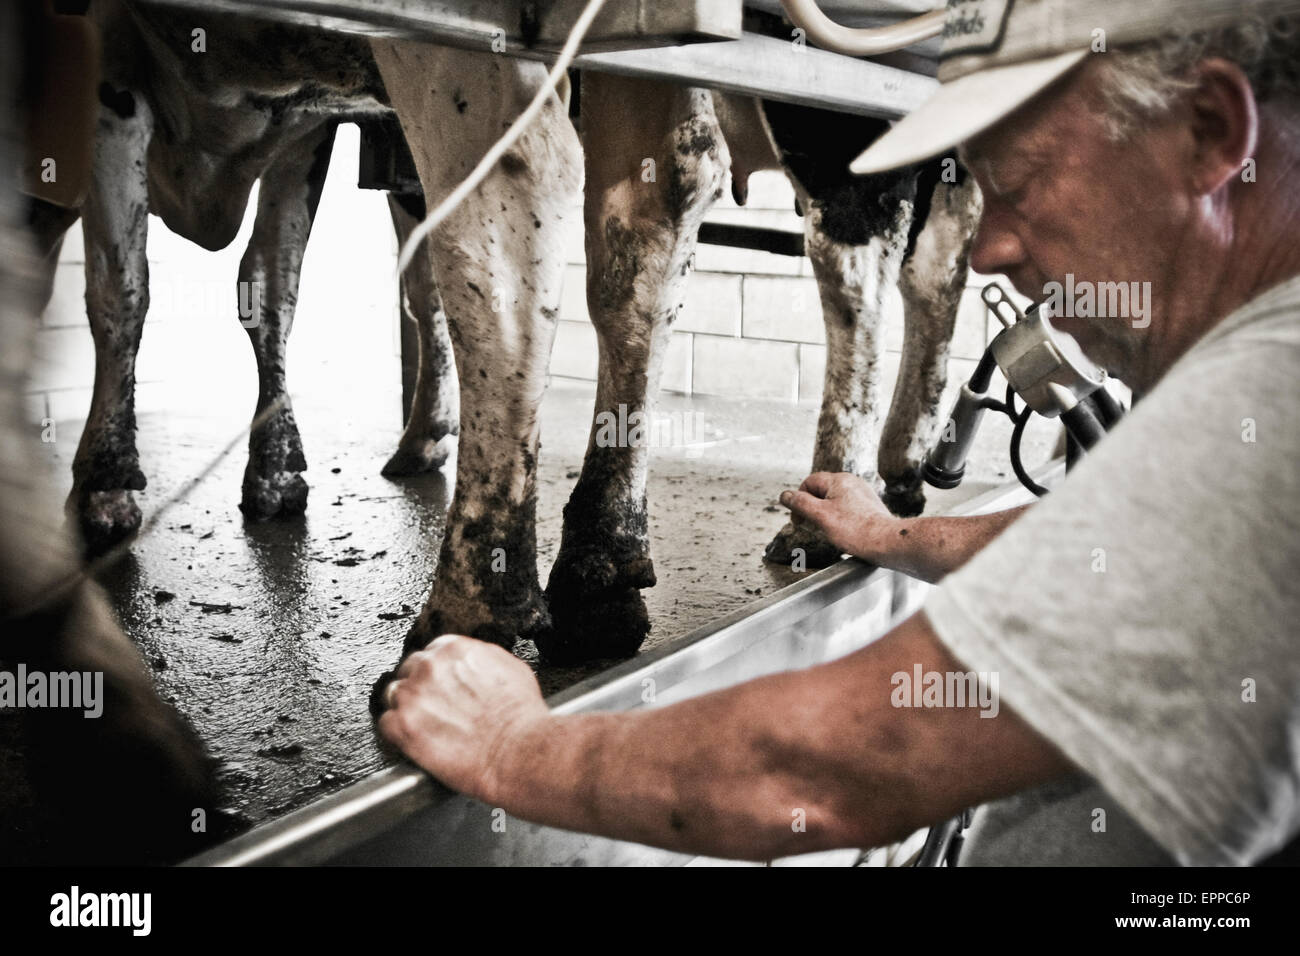 A man is taking a breather while milking the cows in his family farm in Keymar, Maryland. Stock Photo